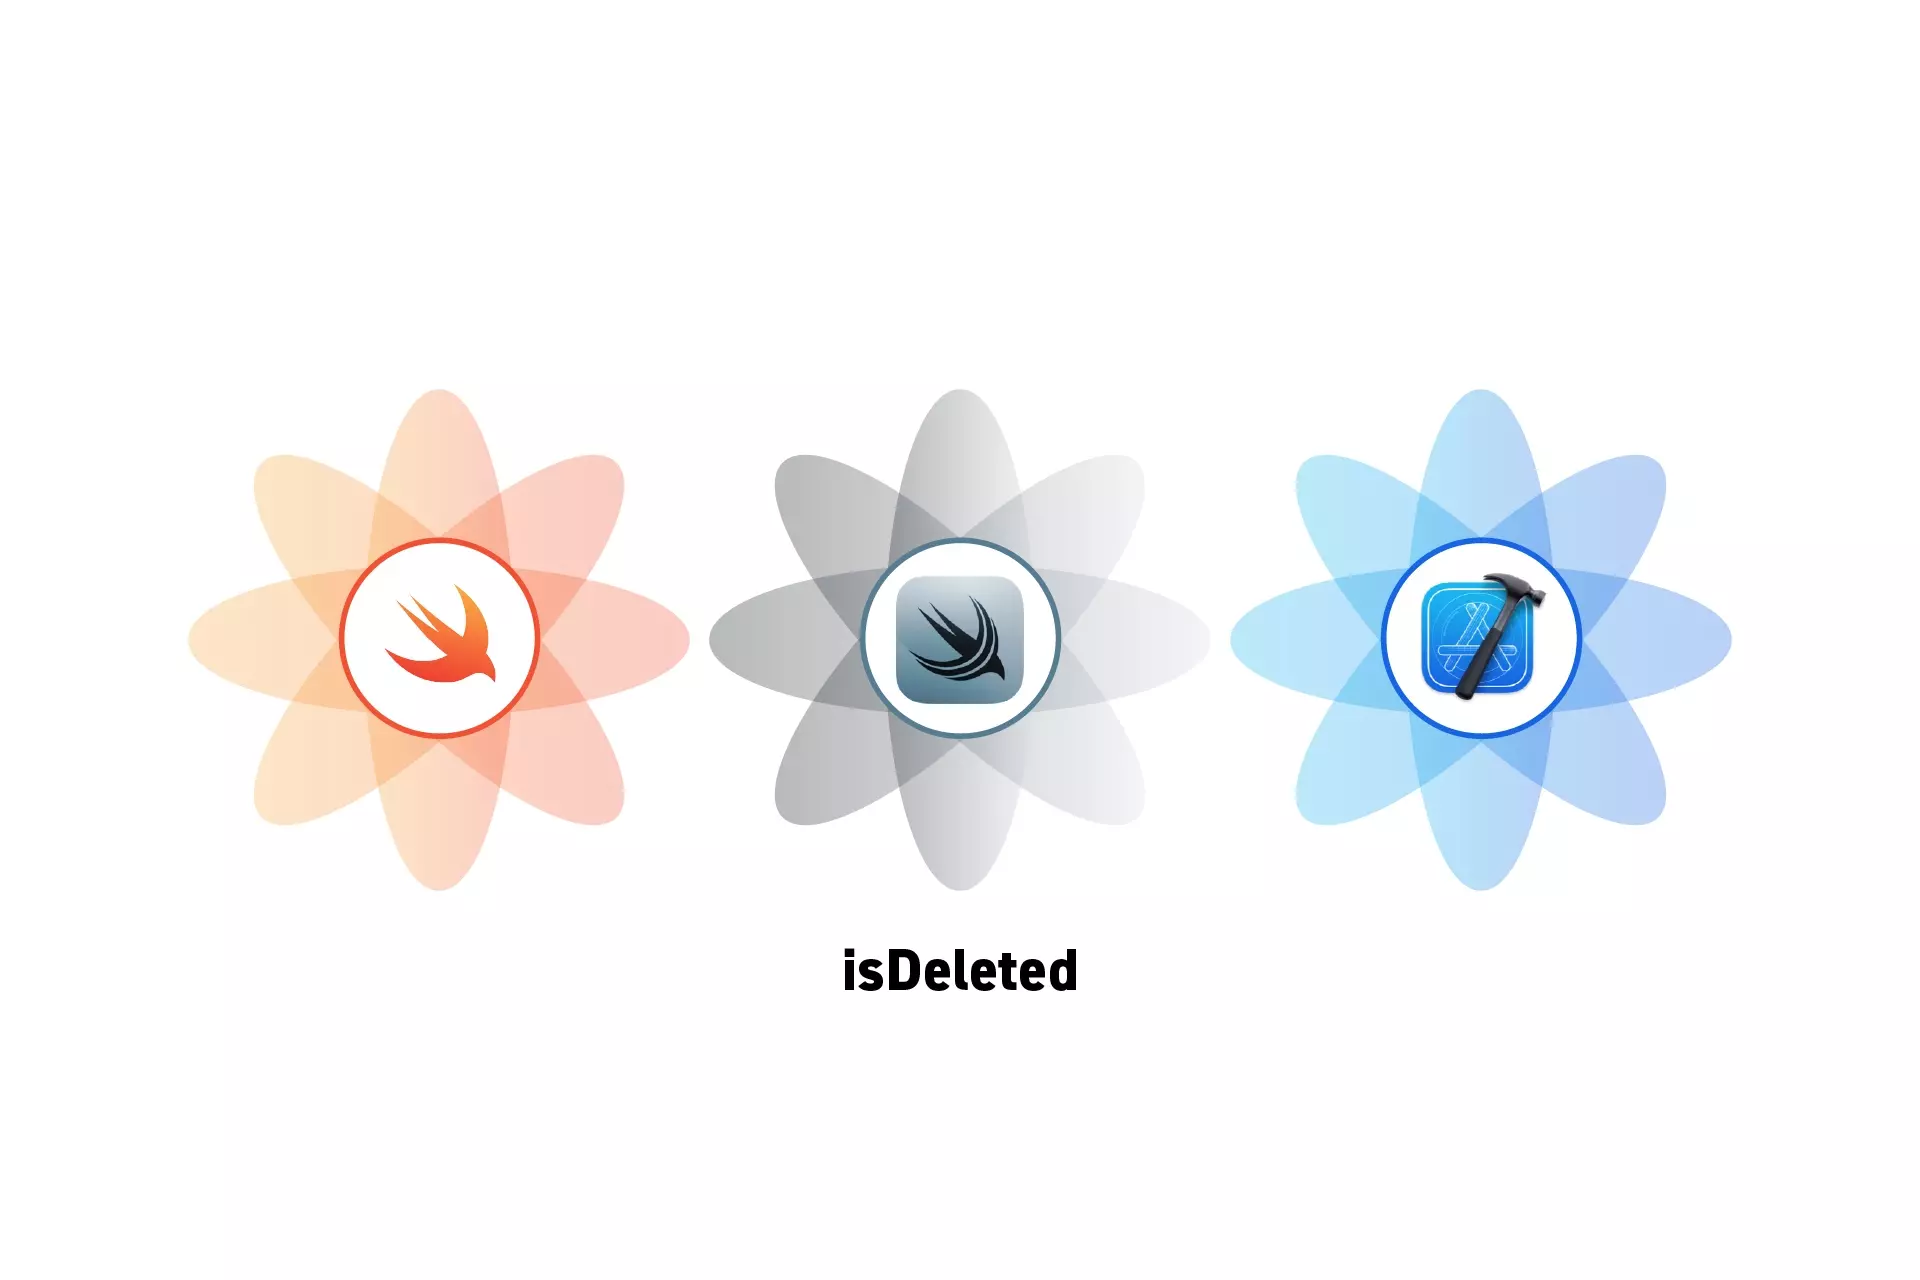 Three flowers that represent Swift, SwiftData and Xcode. Beneath them sits the text "isDeleted."